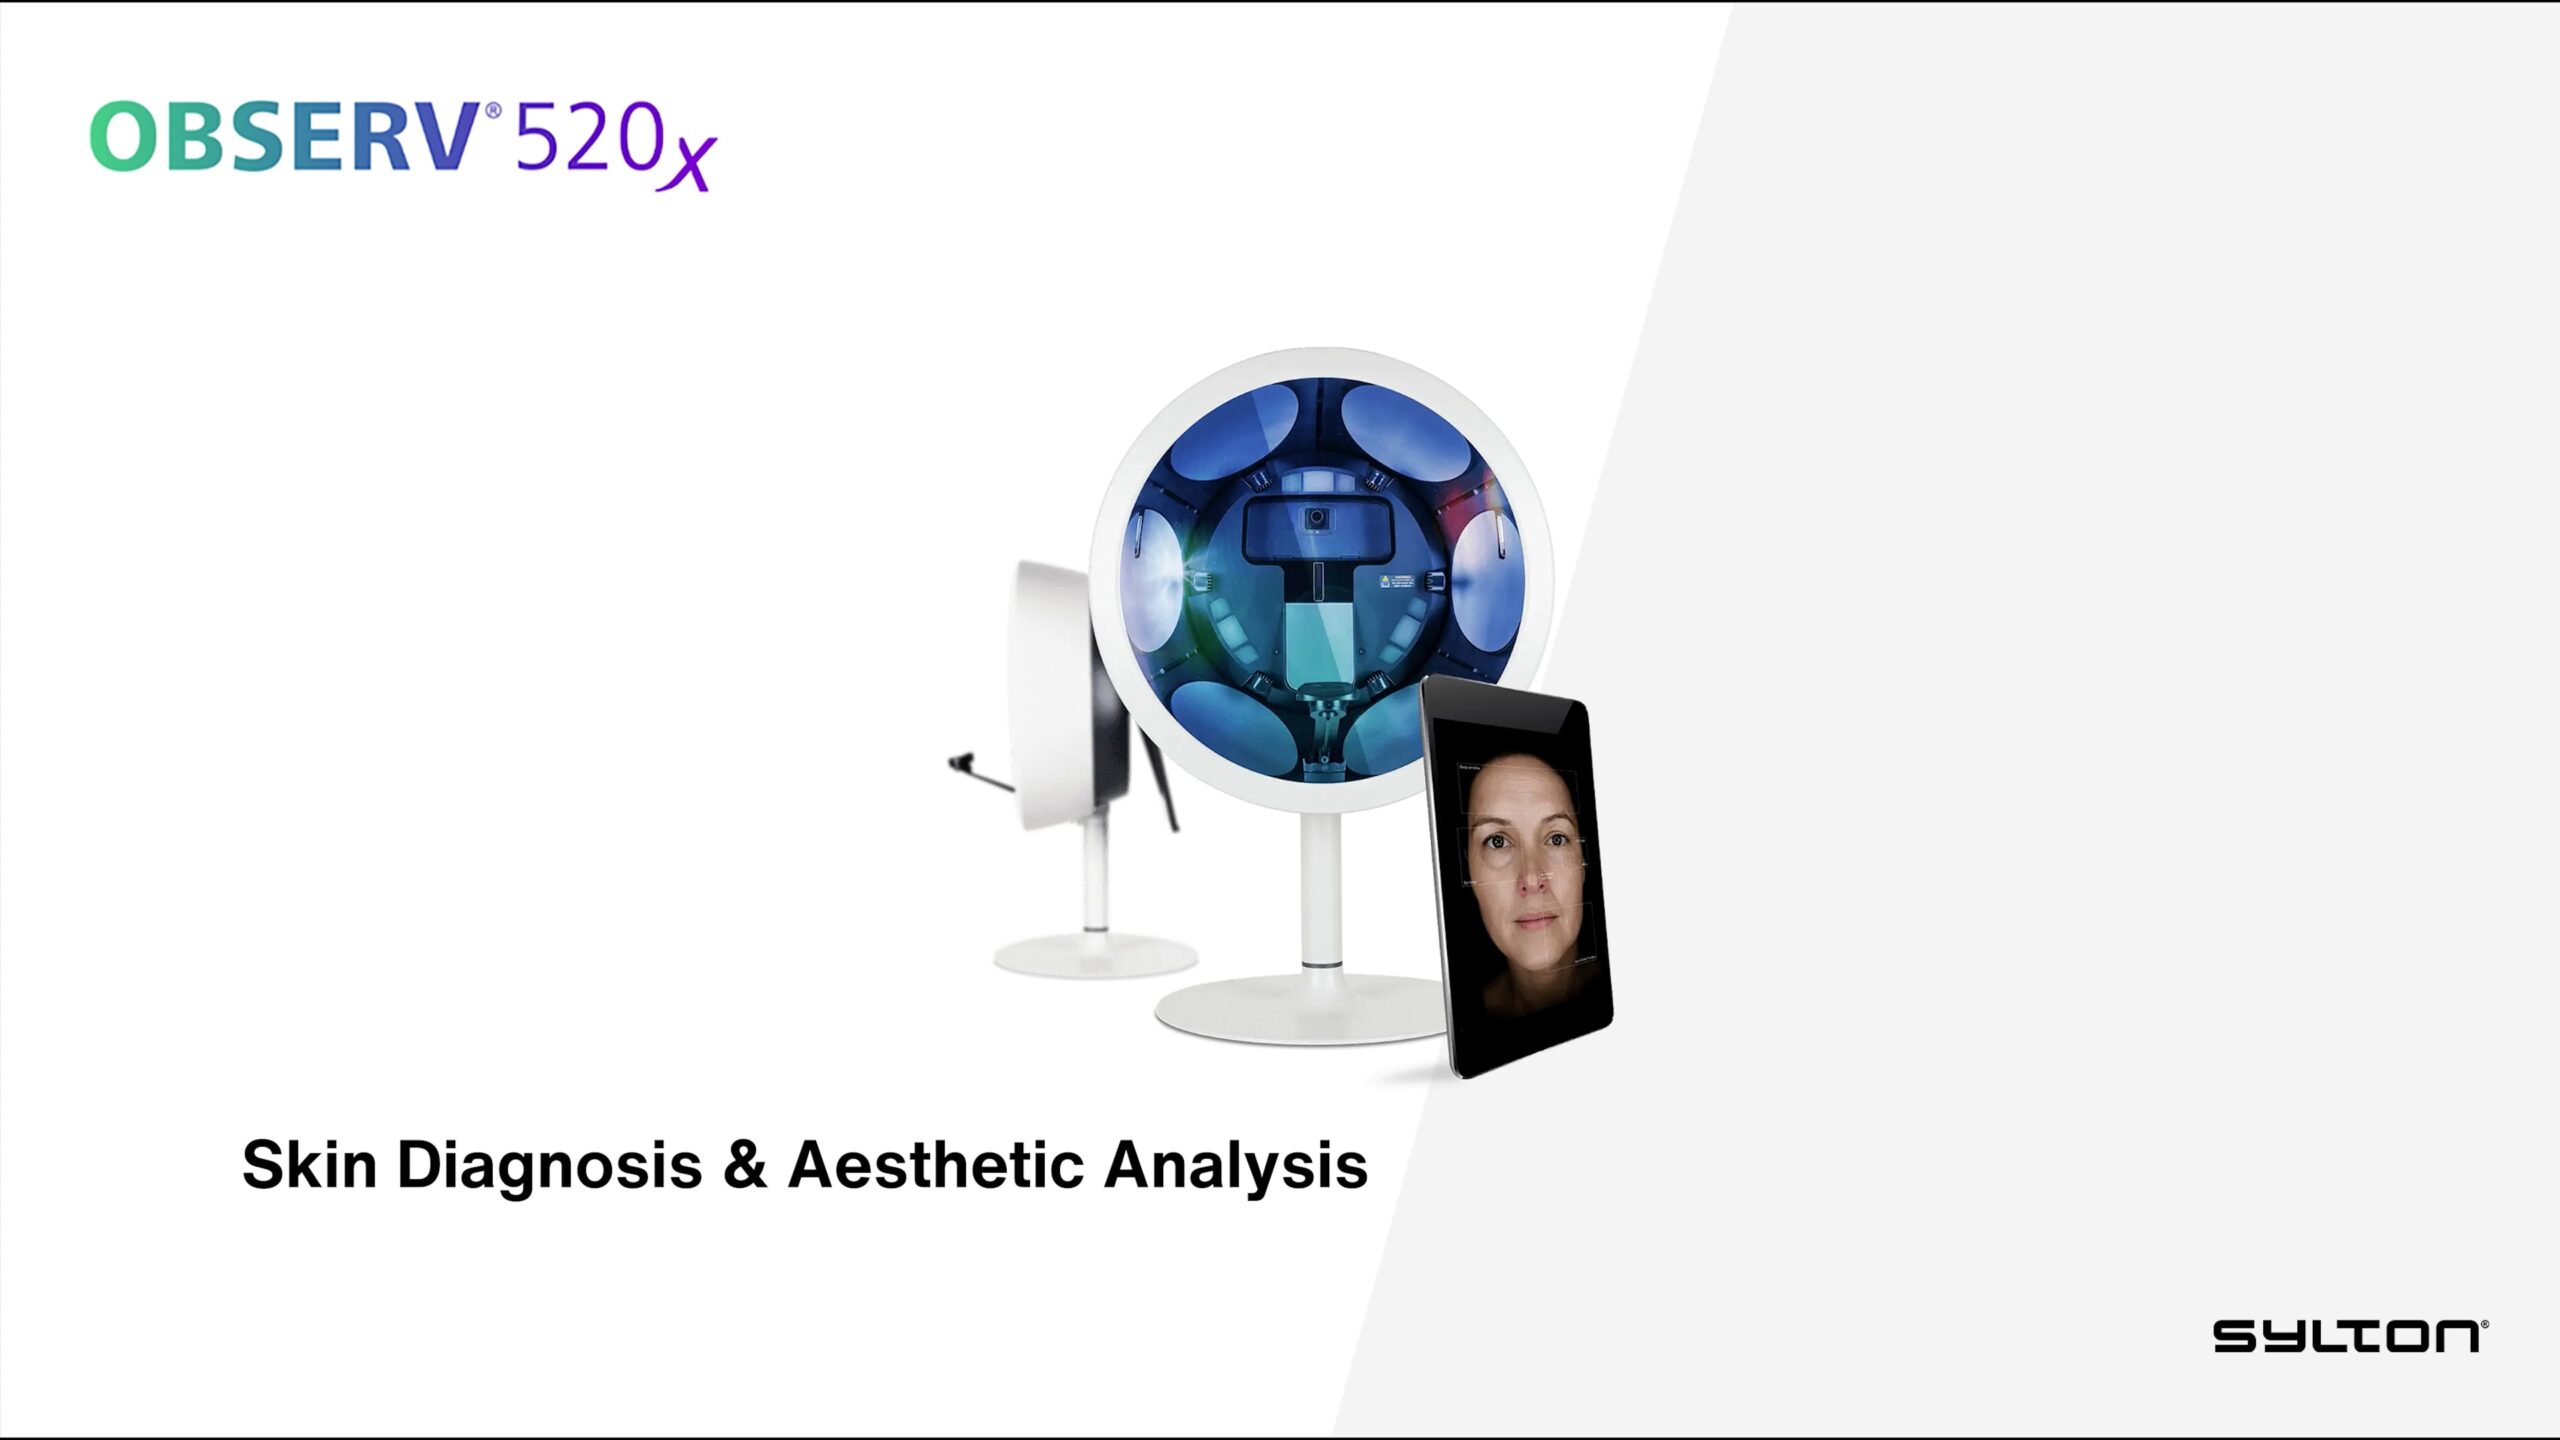 Getting to know the Observ 520x - Skin Diagnosis & Aesthetic Analysis